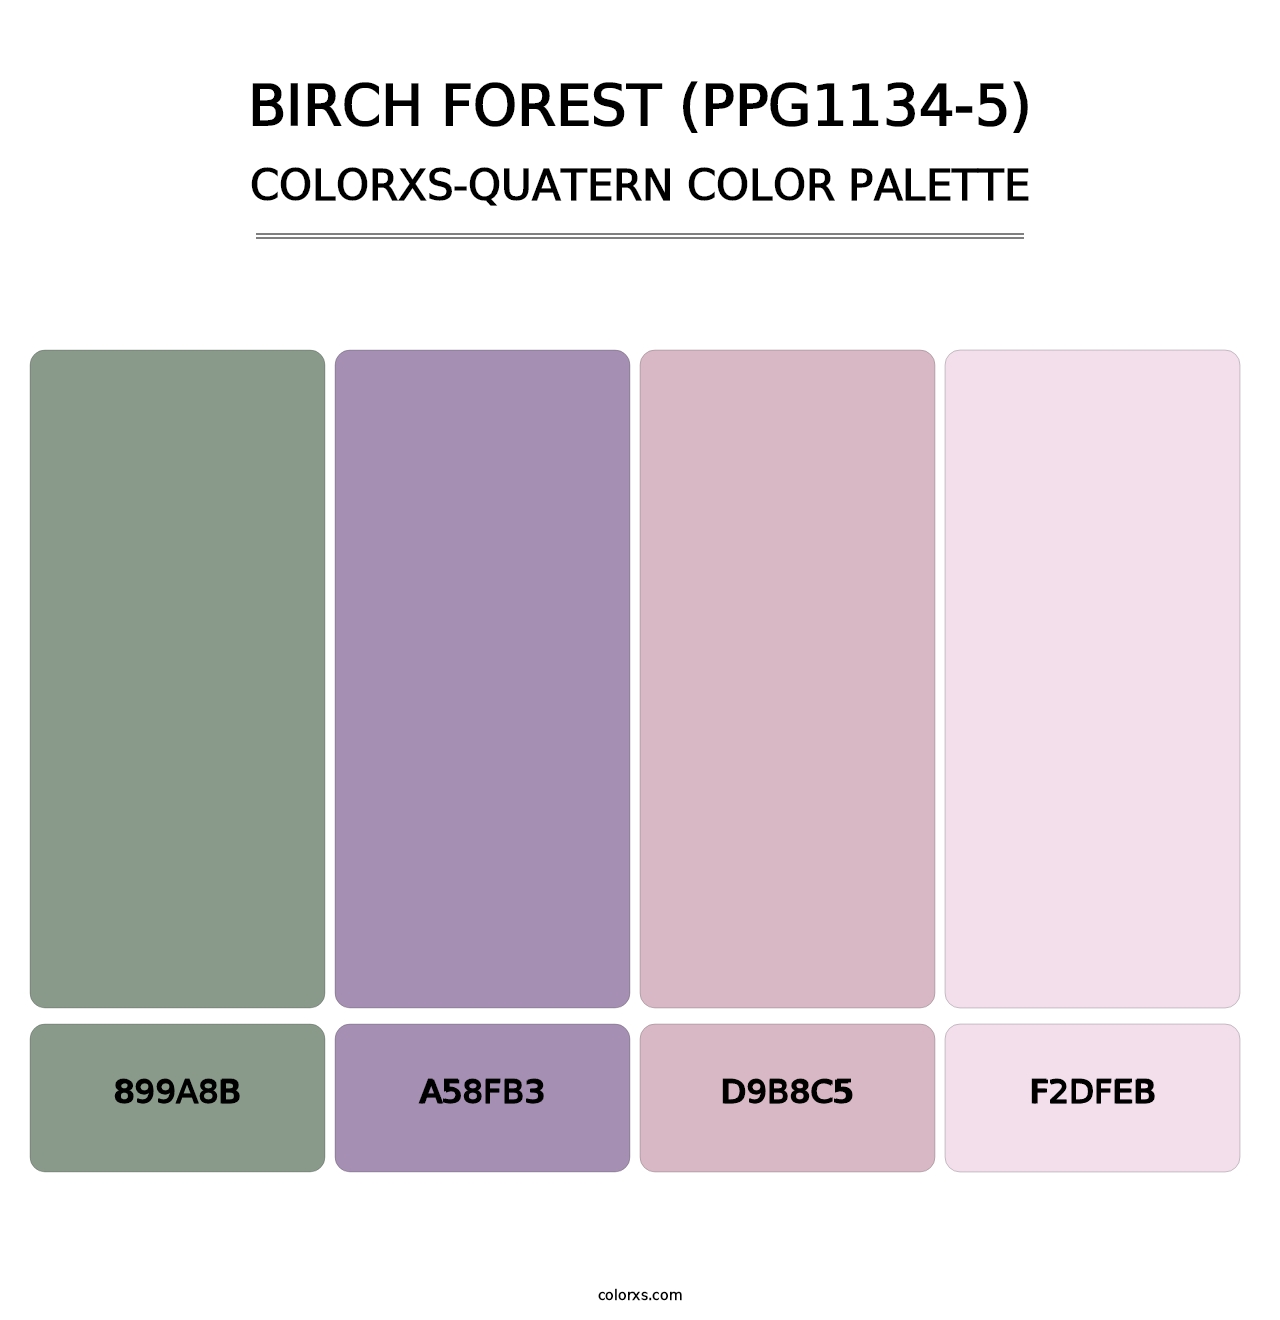 Birch Forest (PPG1134-5) - Colorxs Quatern Palette